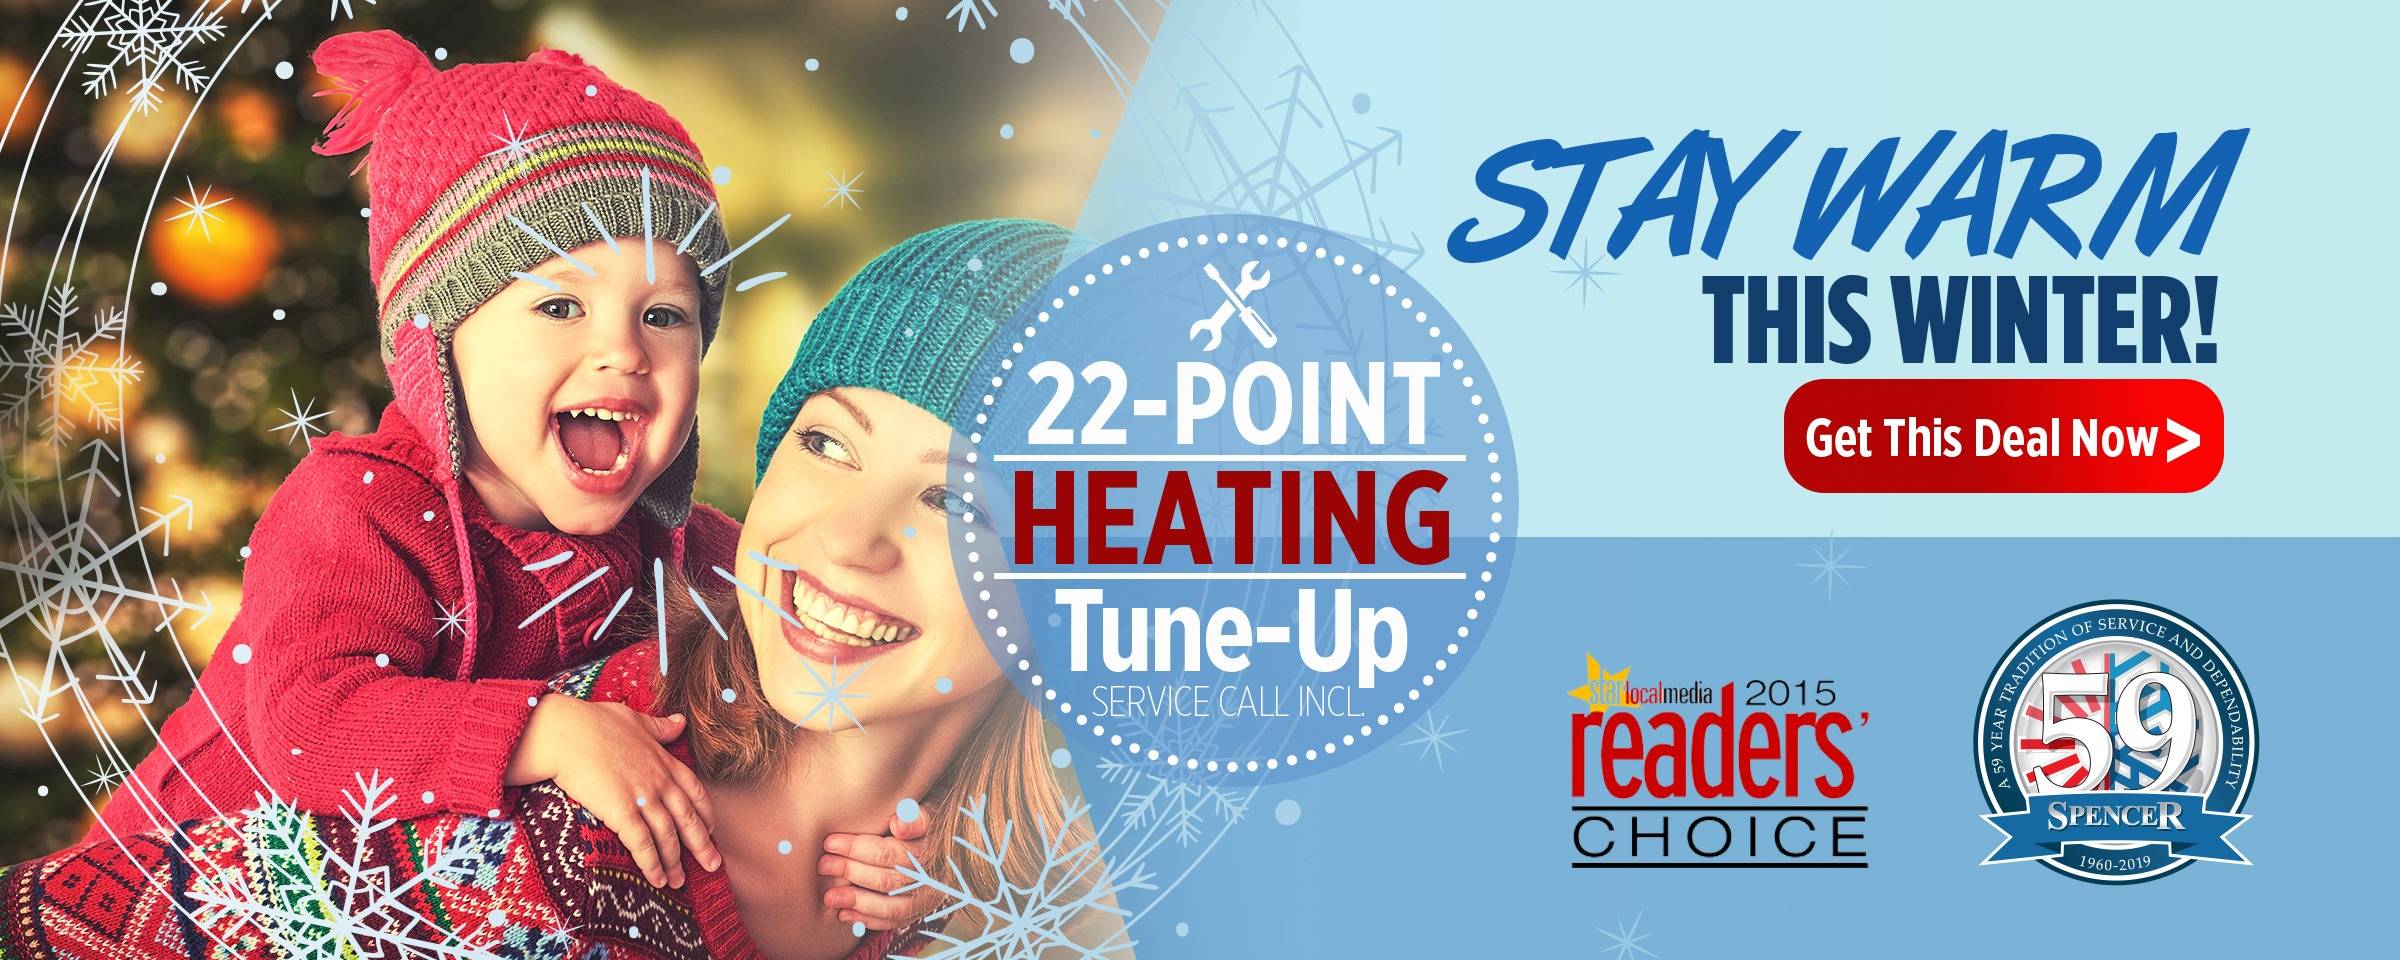 SPENCER winter promo 22 point heating tune up